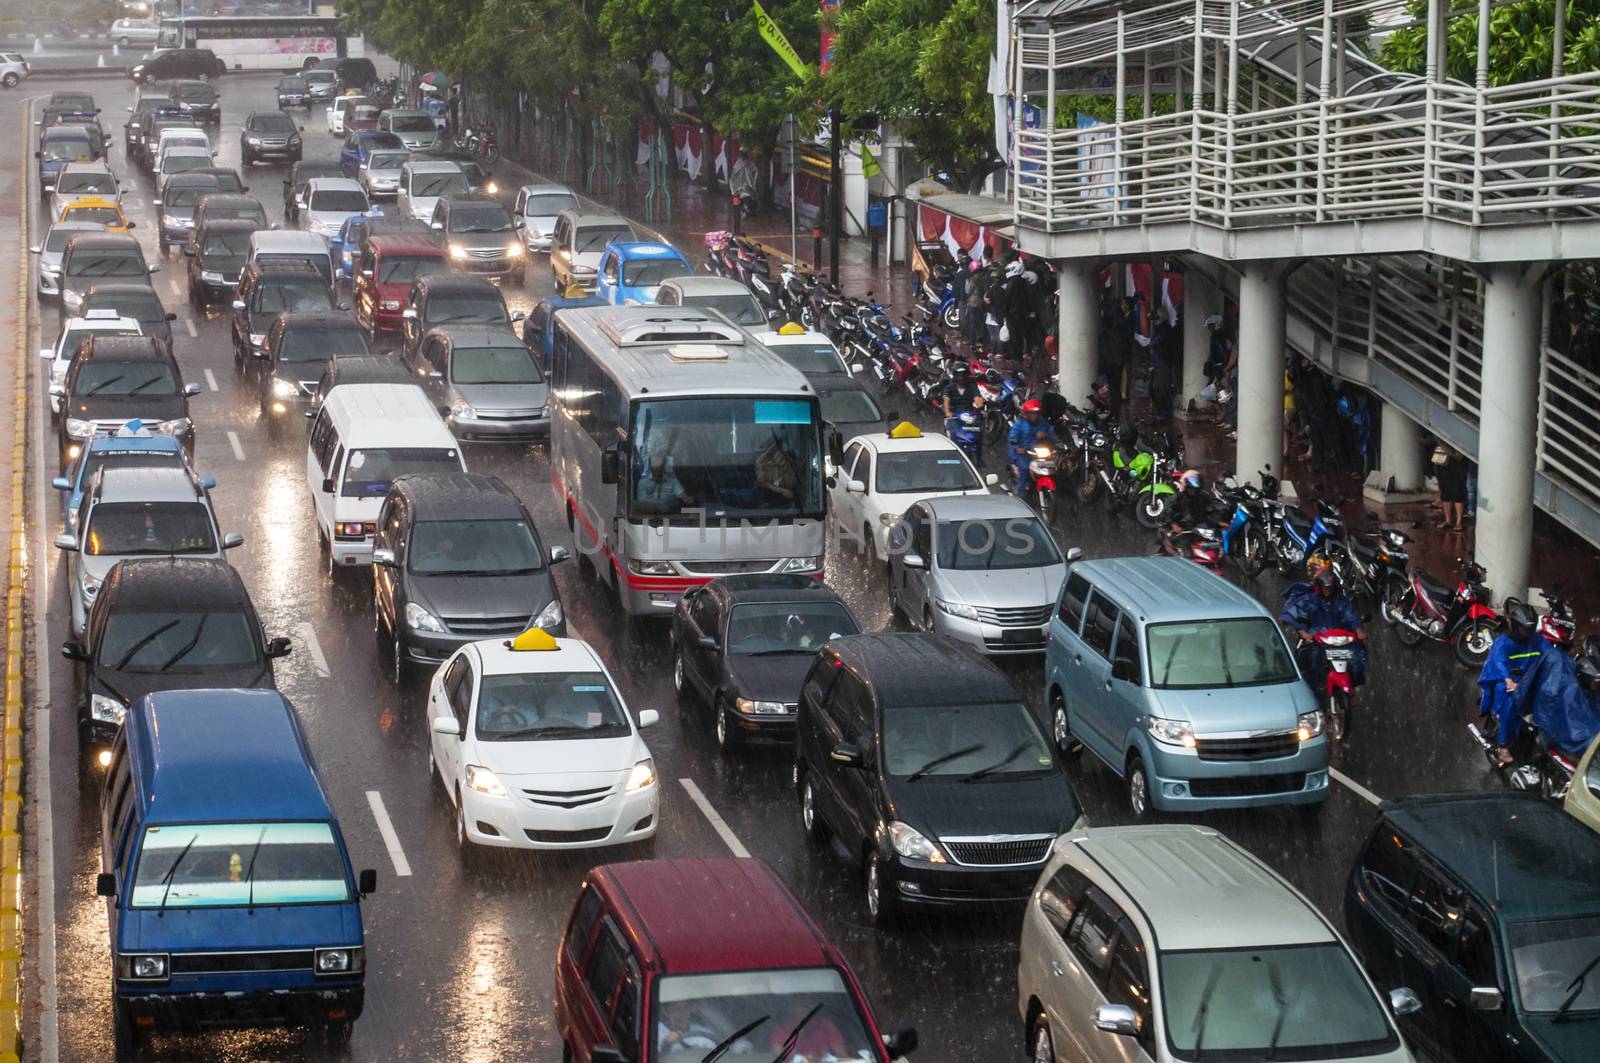 Crowded traffic jam in urban street in bad weather